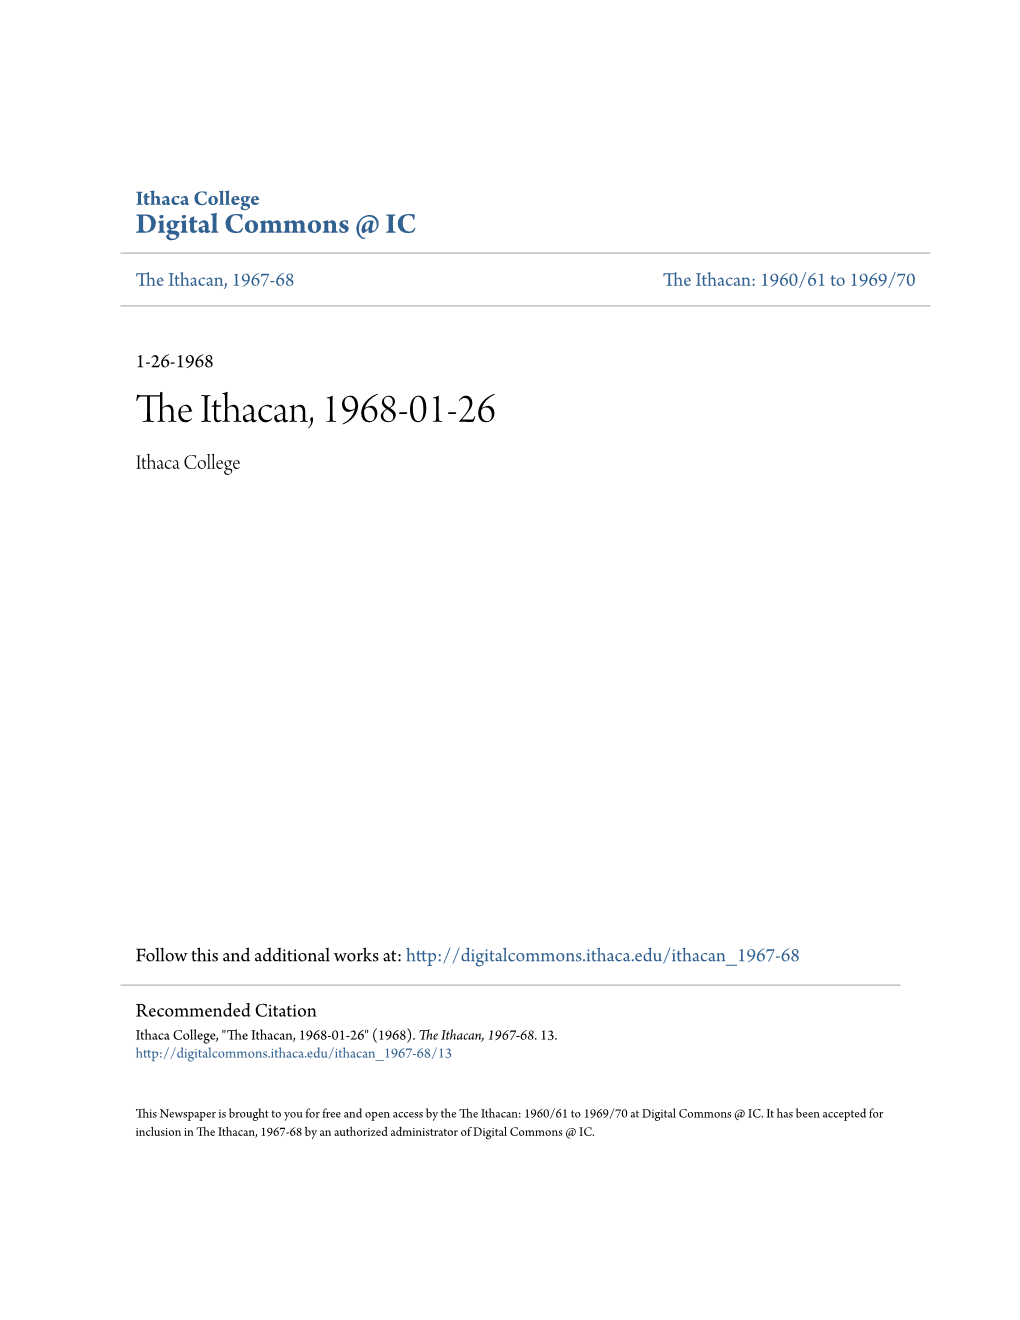 The Ithacan, 1968-01-26